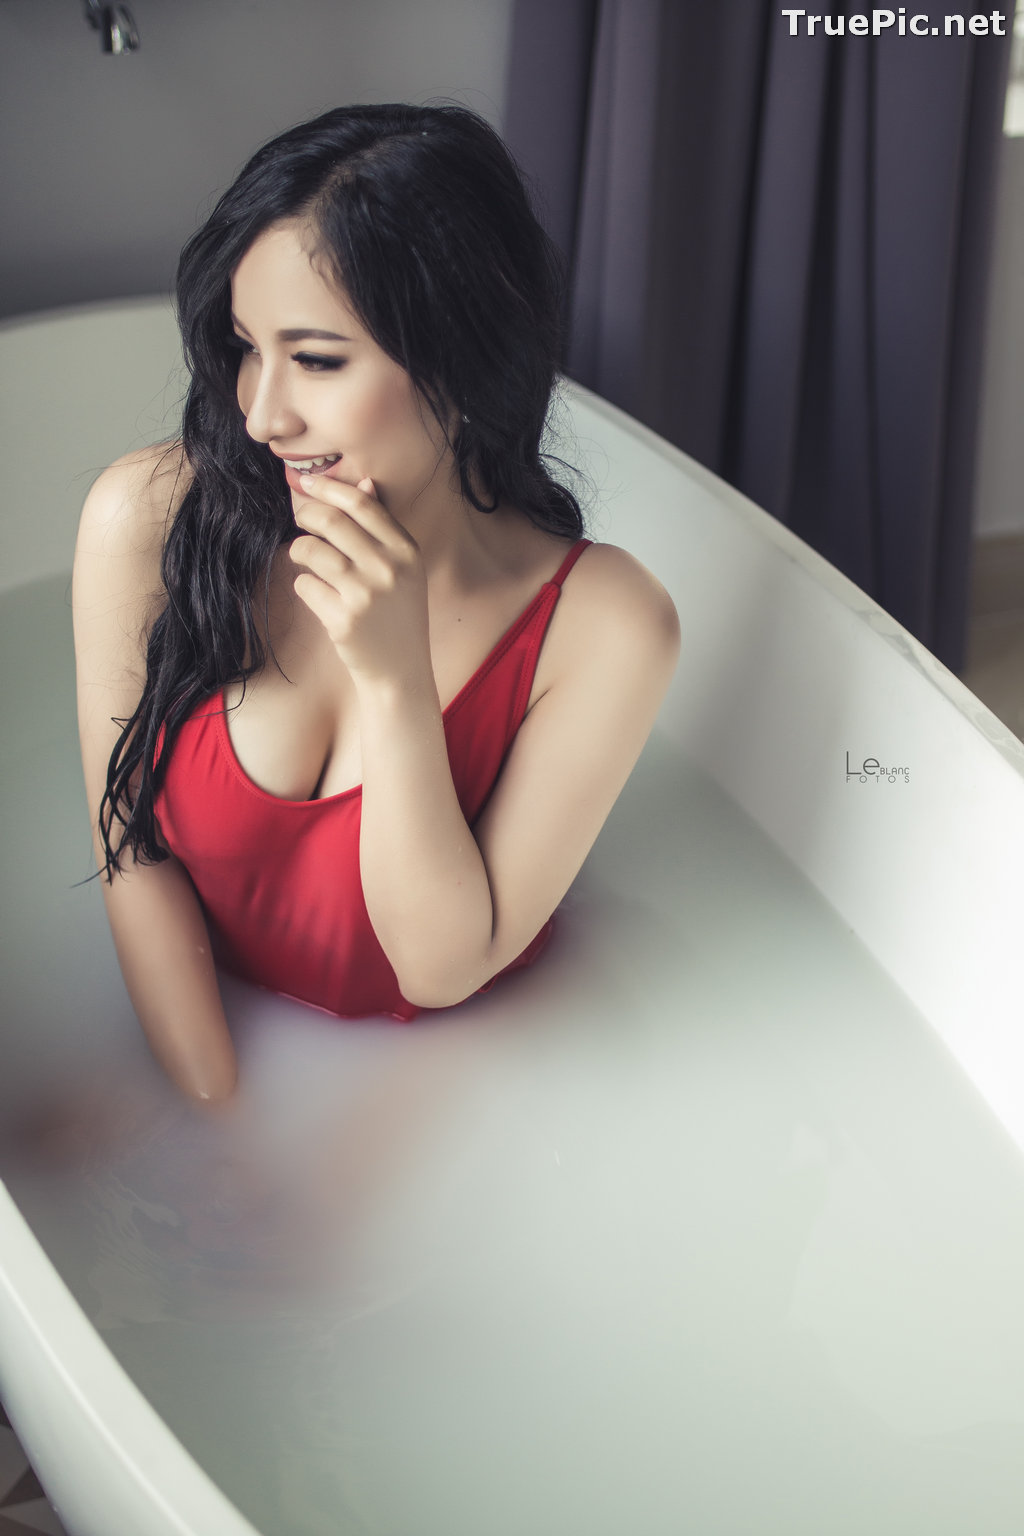 Image Vietnamese Beauties With Lingerie and Bikini – Photo by Le Blanc Studio #12 - TruePic.net - Picture-5